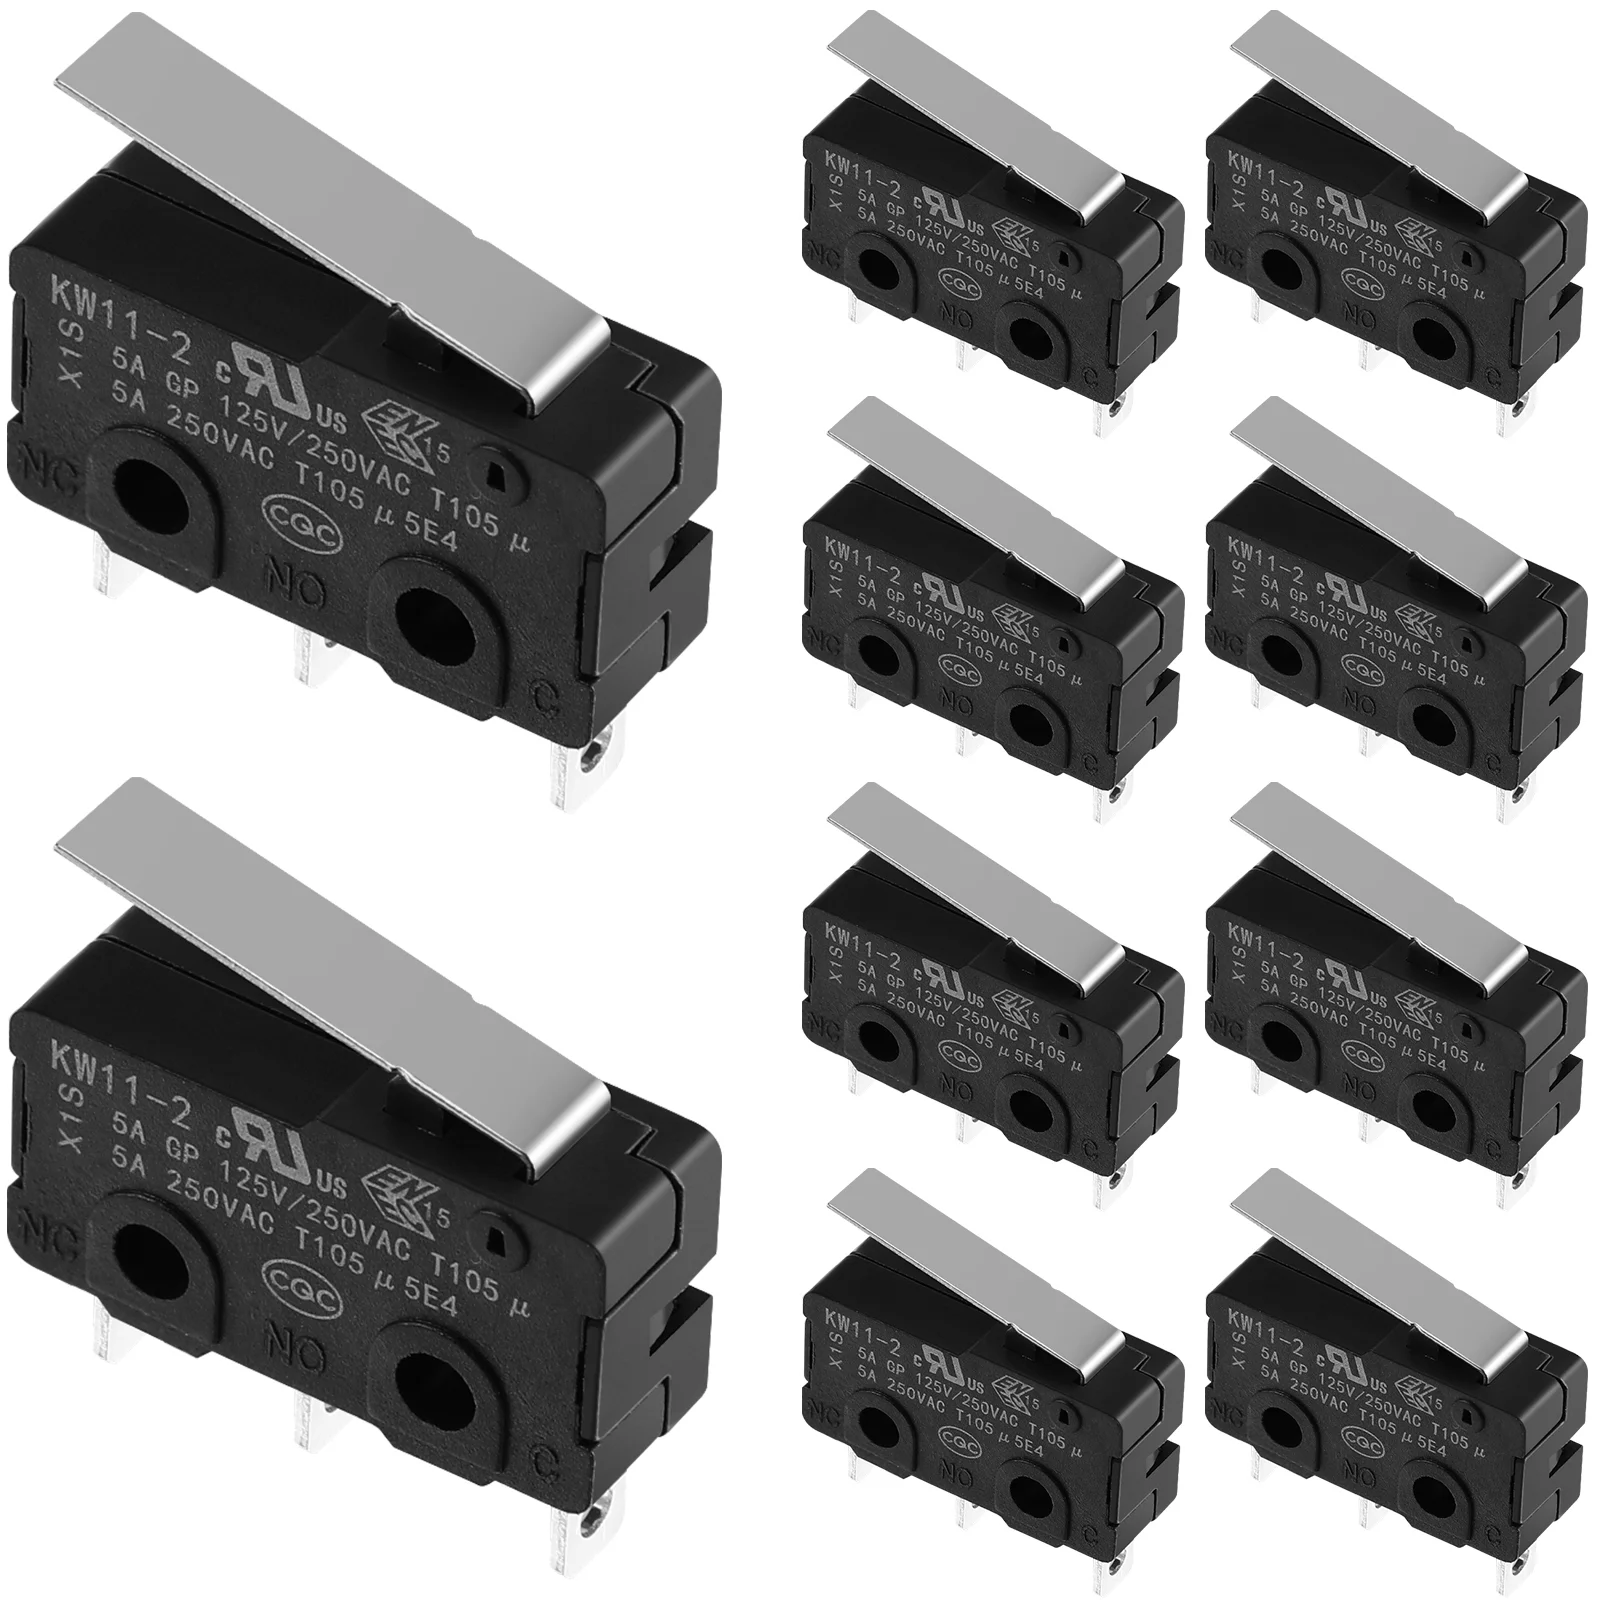 

10 Pcs Premium Plastic Professional Micro Switches with Lever Limit Switches Momentary Limit Switches